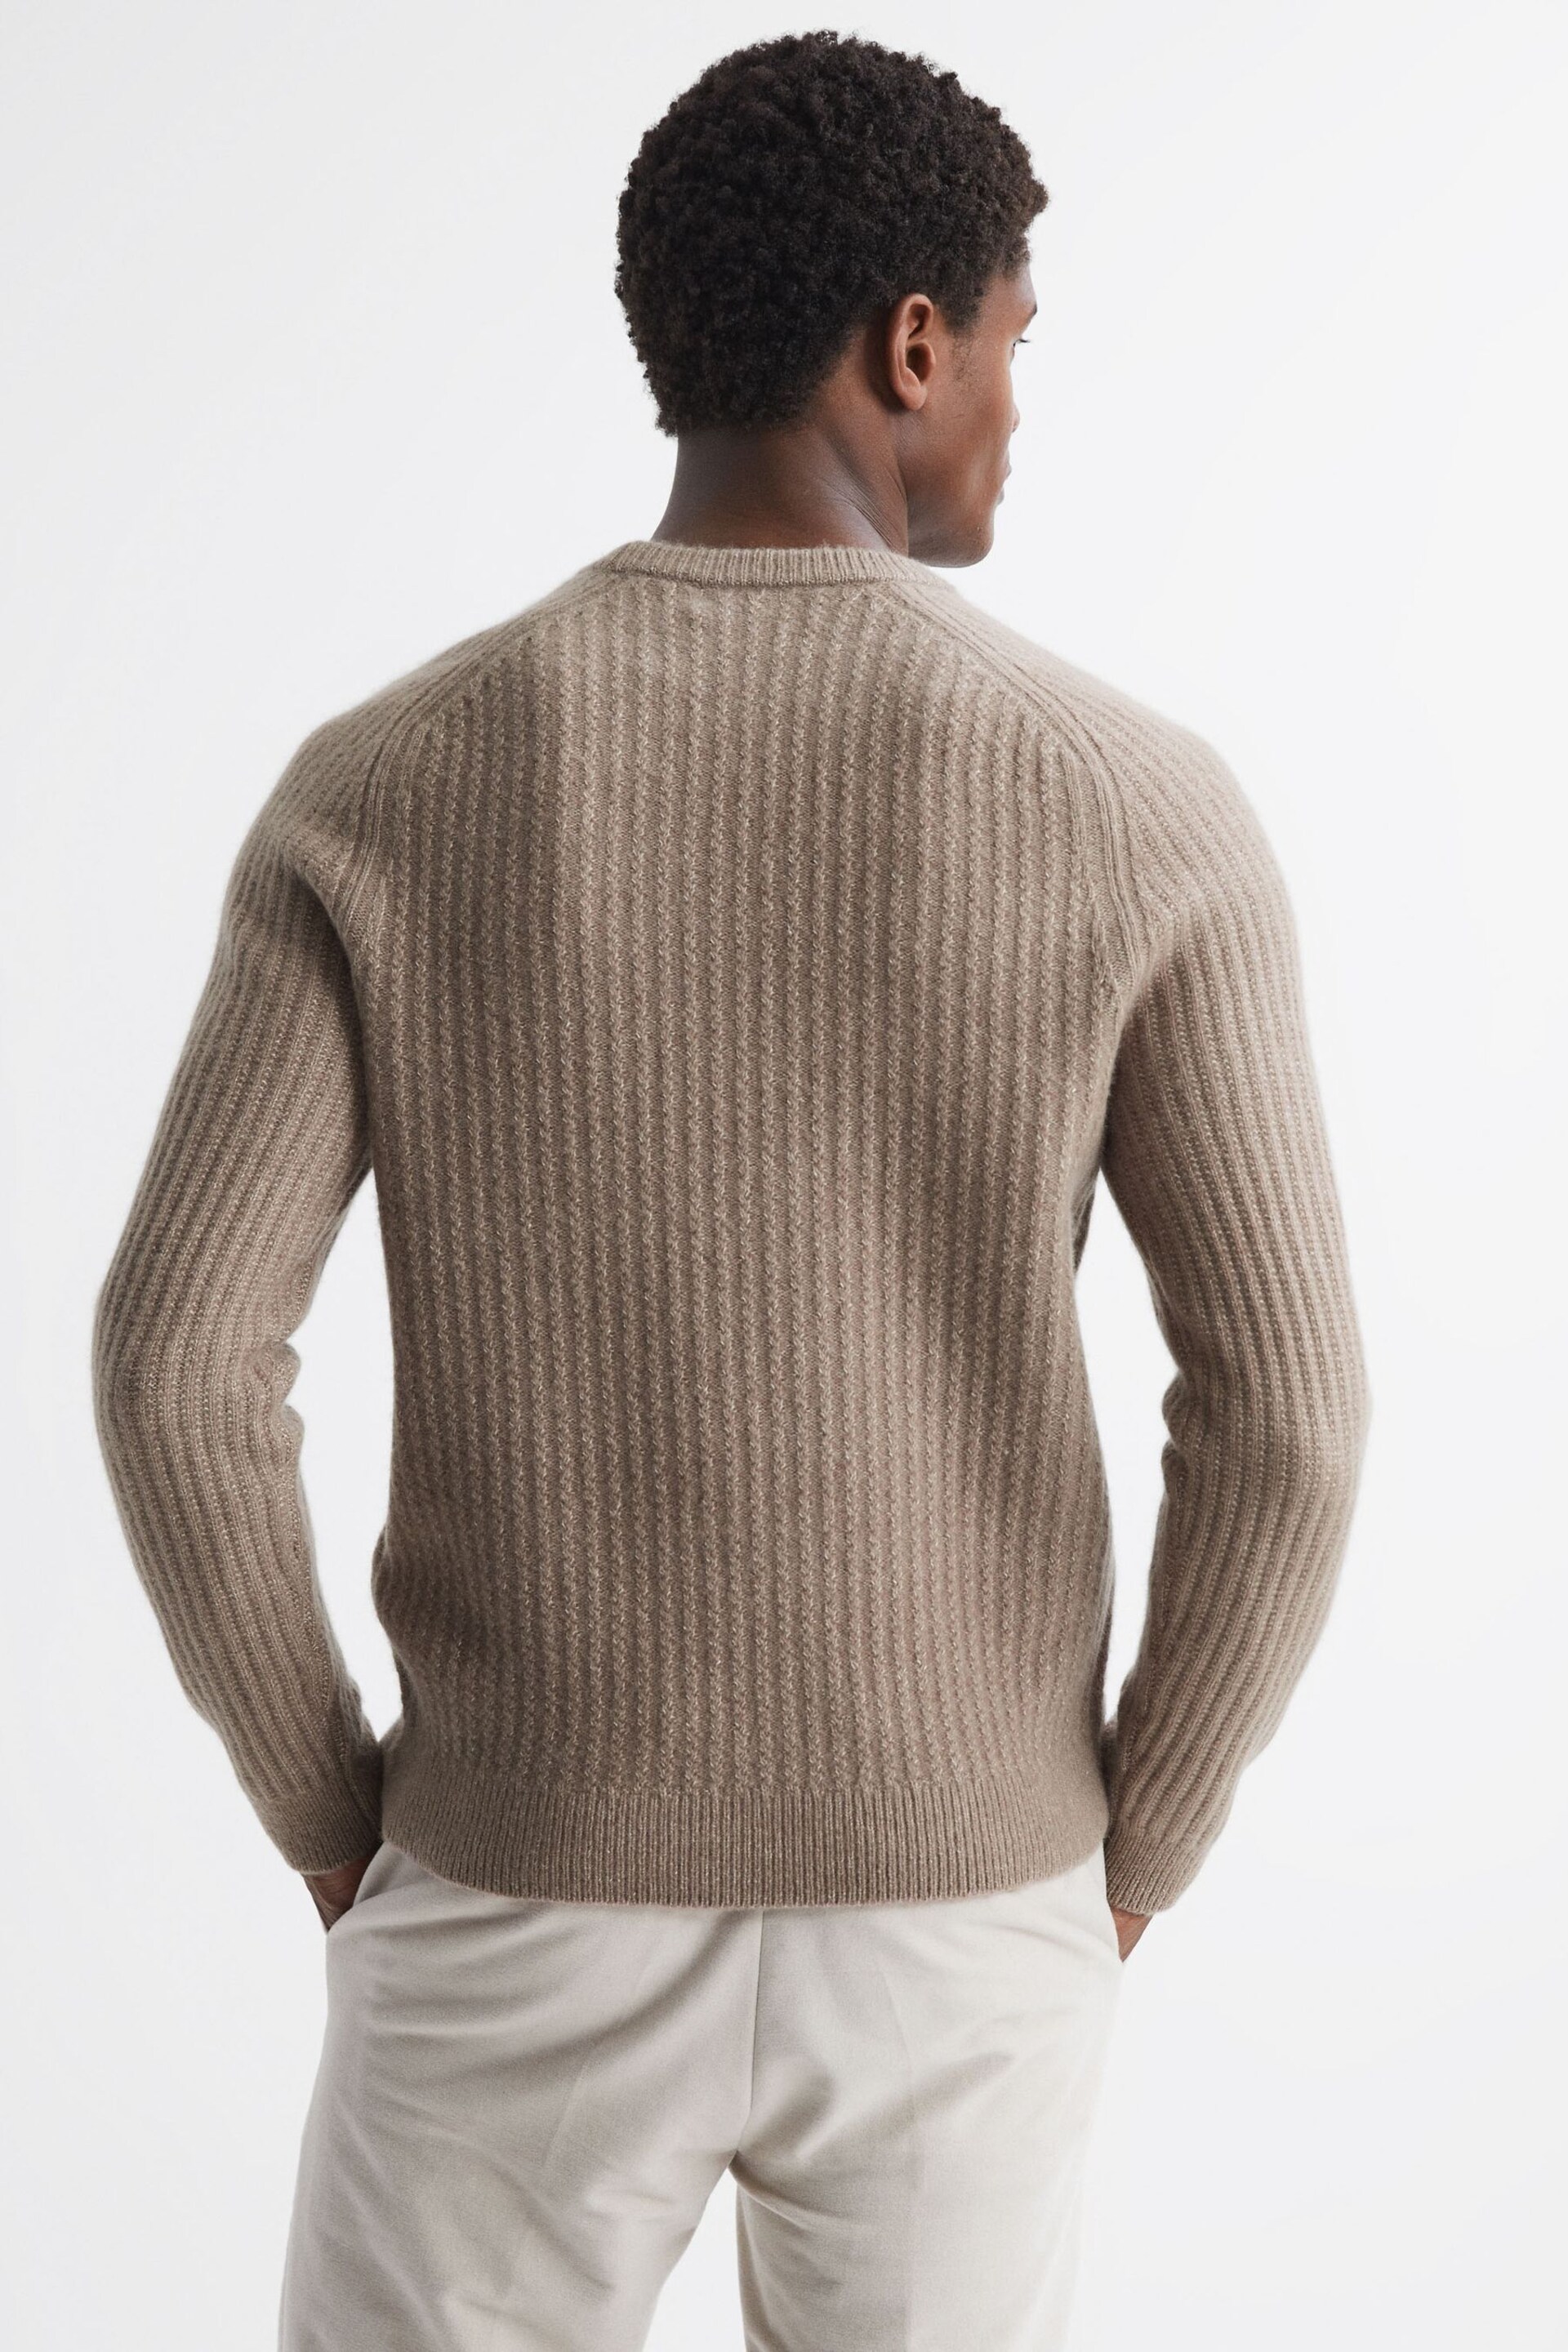 Reiss Mouse Melange Millerson Wool-Cotton Textured Crew Neck Jumper - Image 5 of 5